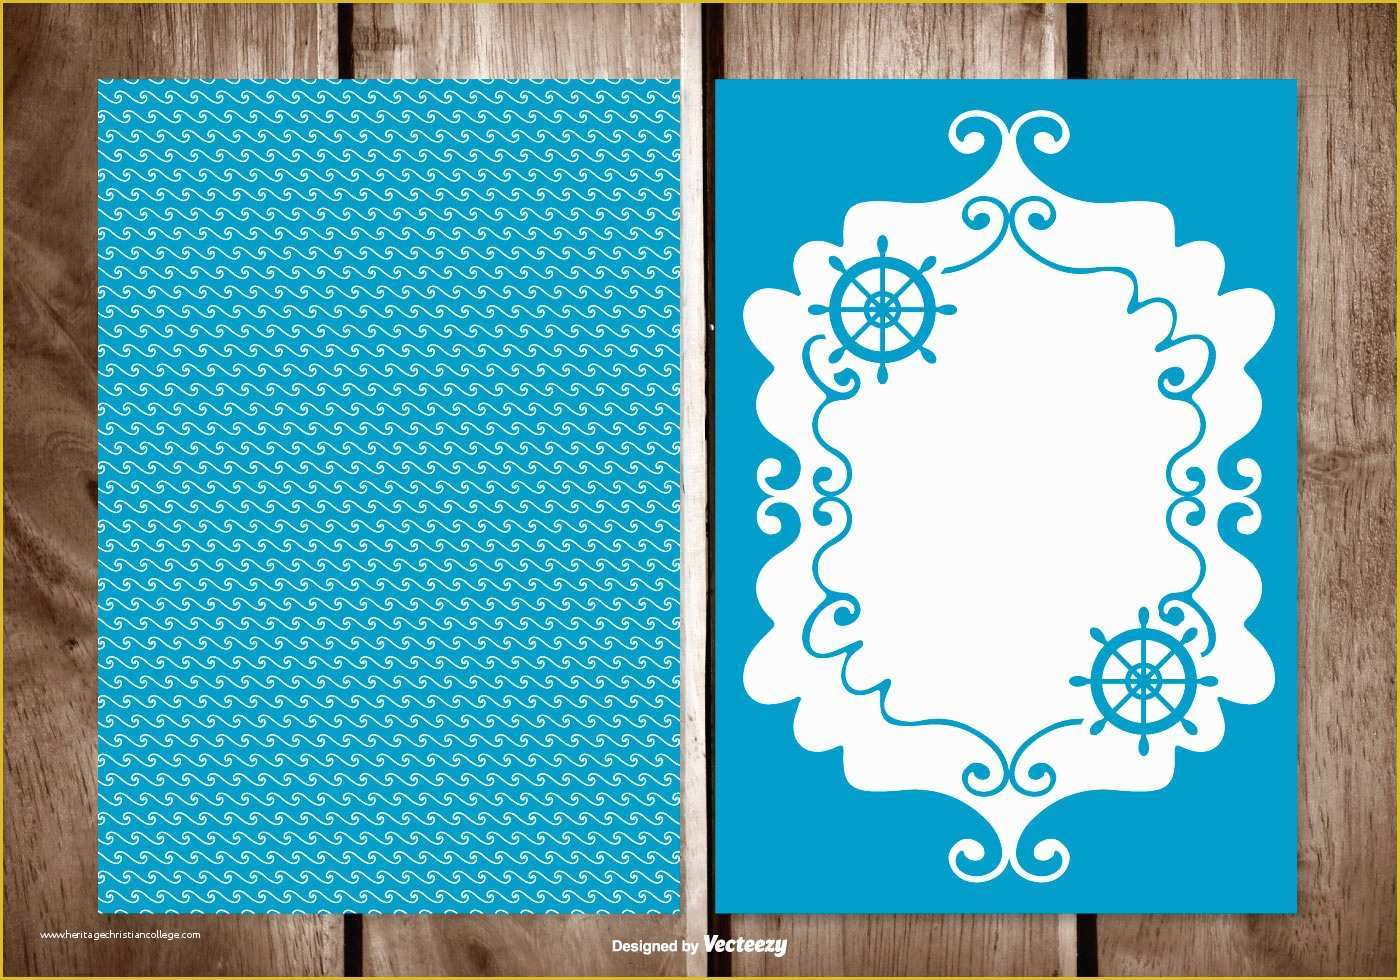 Free Greeting Card Templates Of Blank Greeting Card Free Vector Art Free Downloads